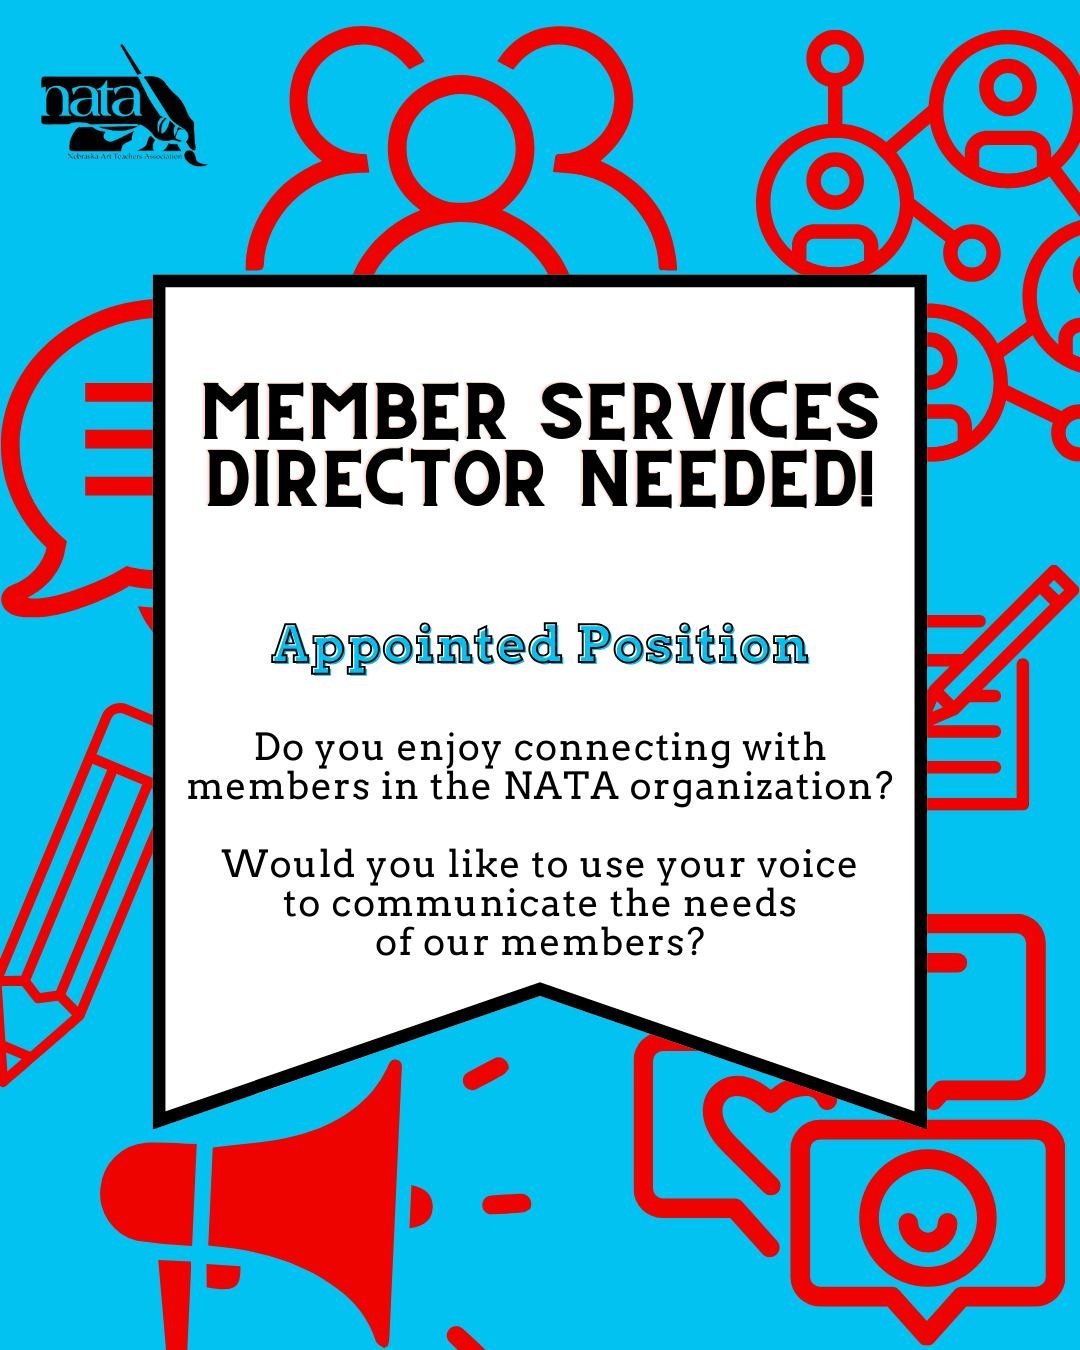 With Joe Bristol&rsquo;s term as president-elect beginning July 1, the NATA Board of Directors is searching out a member to serve as Member Services Director. This is an appointed position by the president with the director serving as a voting member